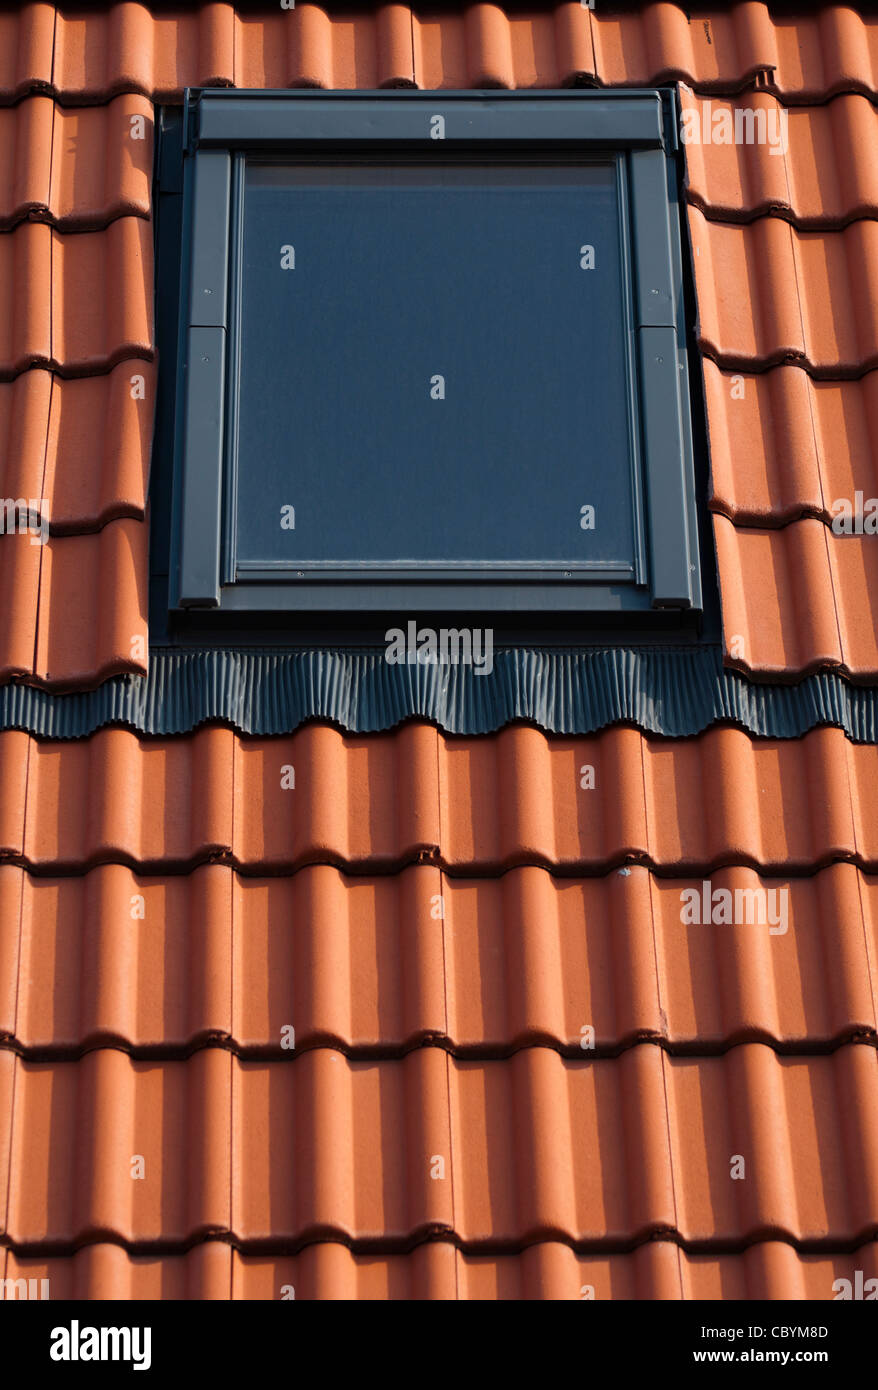 Dormer on a red tiled roof Stock Photo